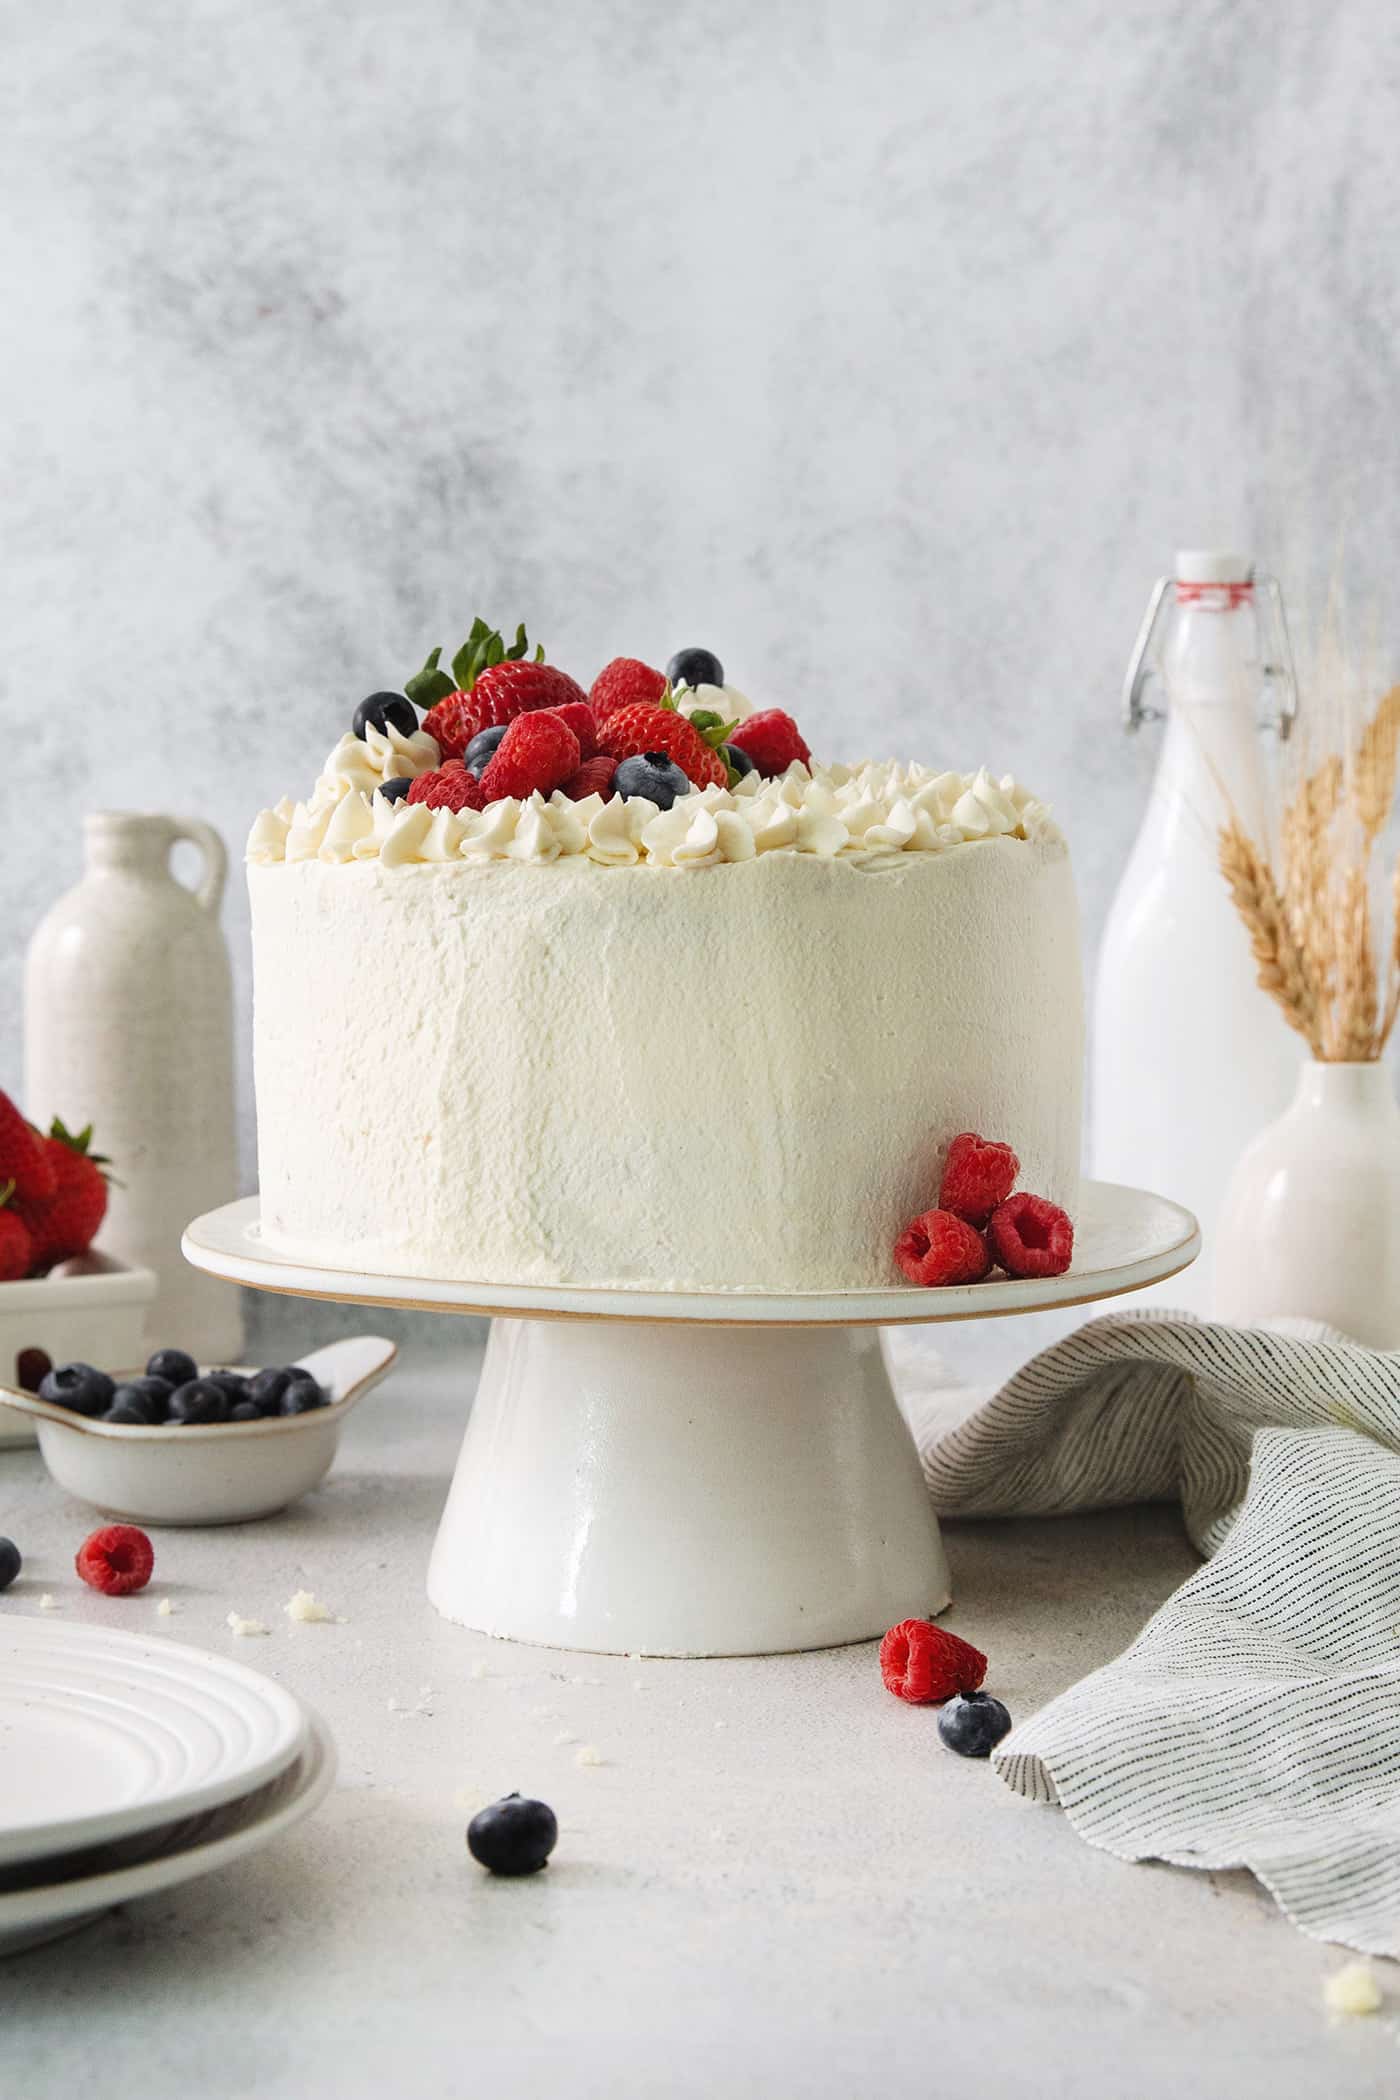 A Chantilly cake on a white cake stand topped with berries.